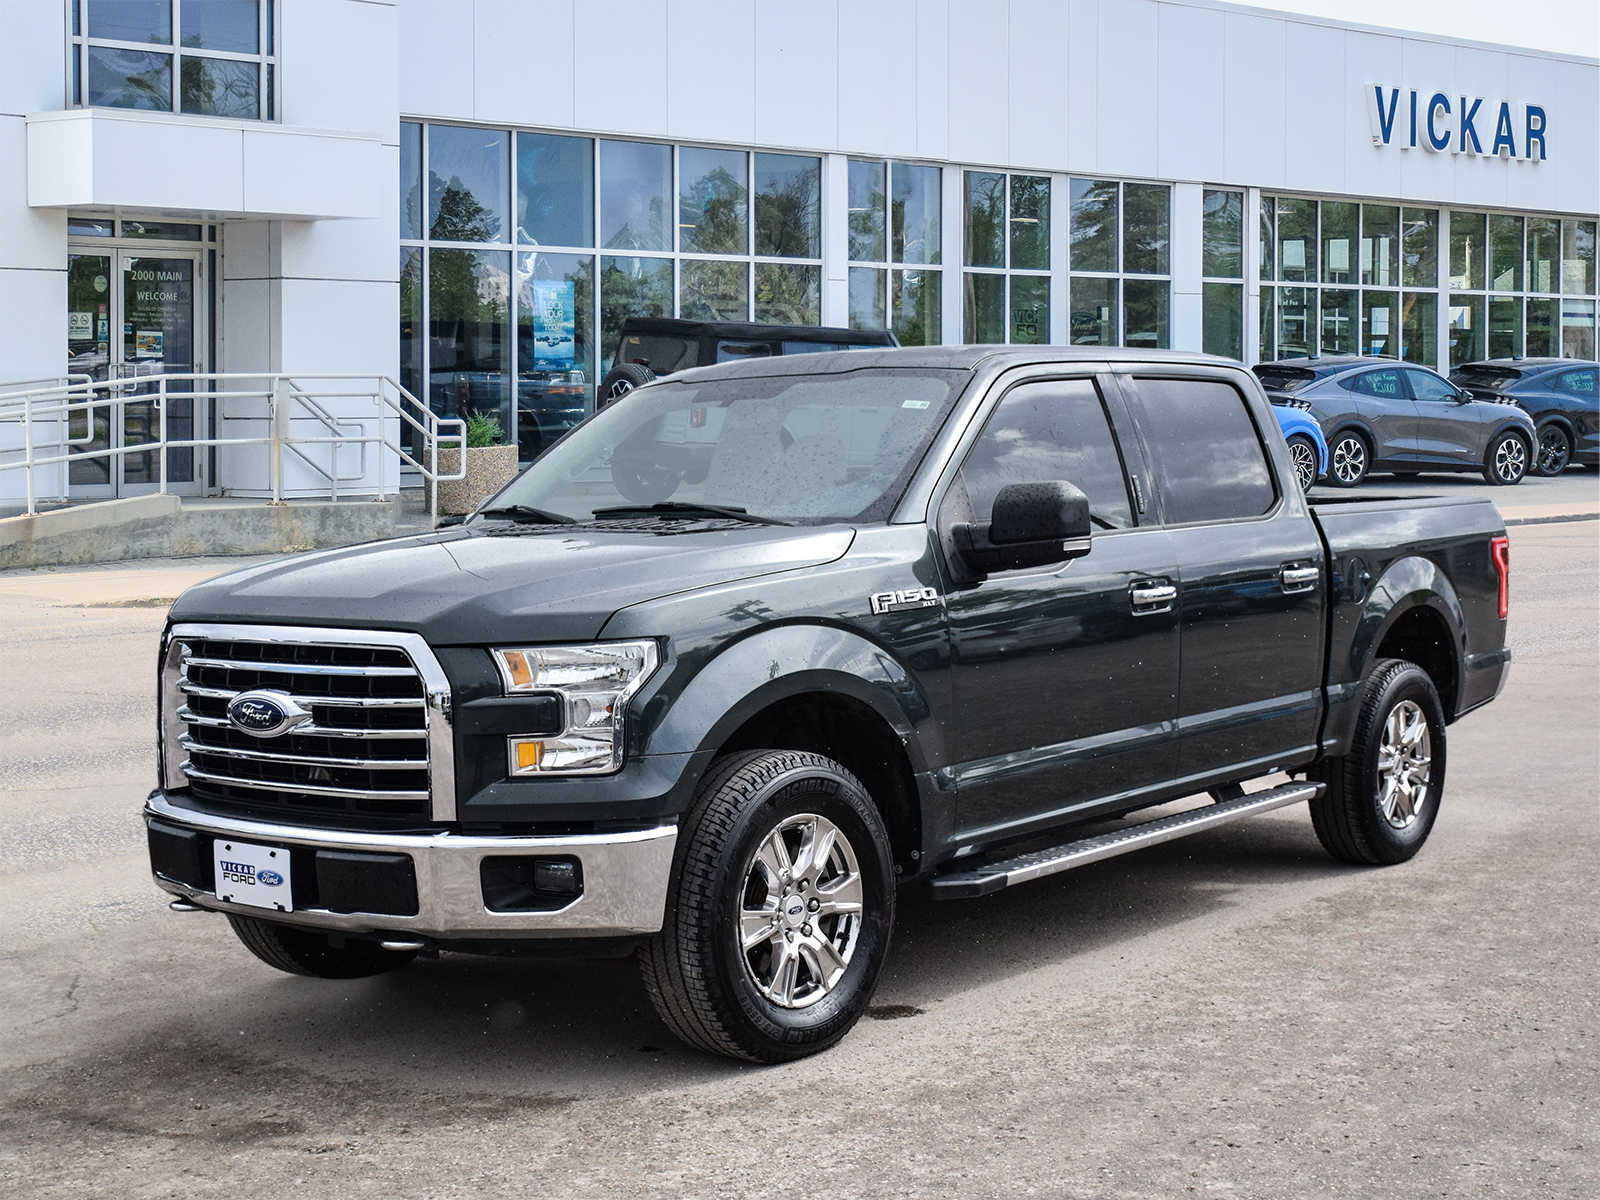 2015 Ford F-150 4WD Crew XLT 5.0 V8 Wholesale To the public as-is